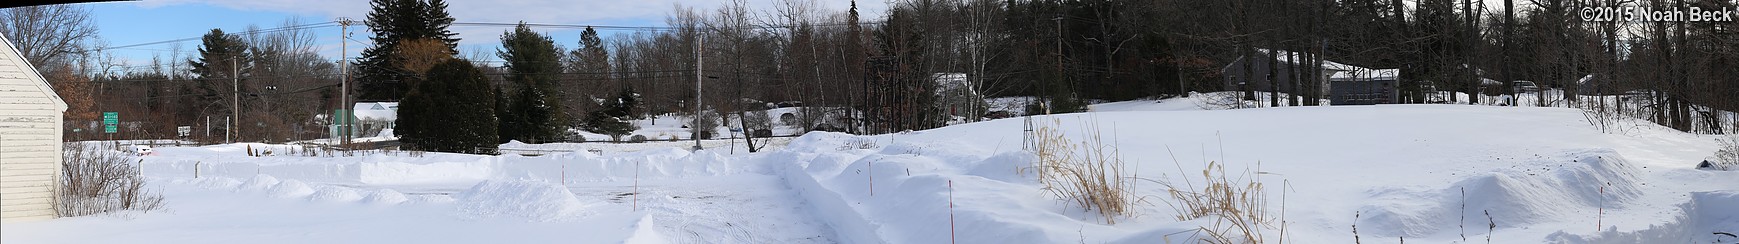 January 28, 2015: Panorama taken from the front of the barn the day after the storm